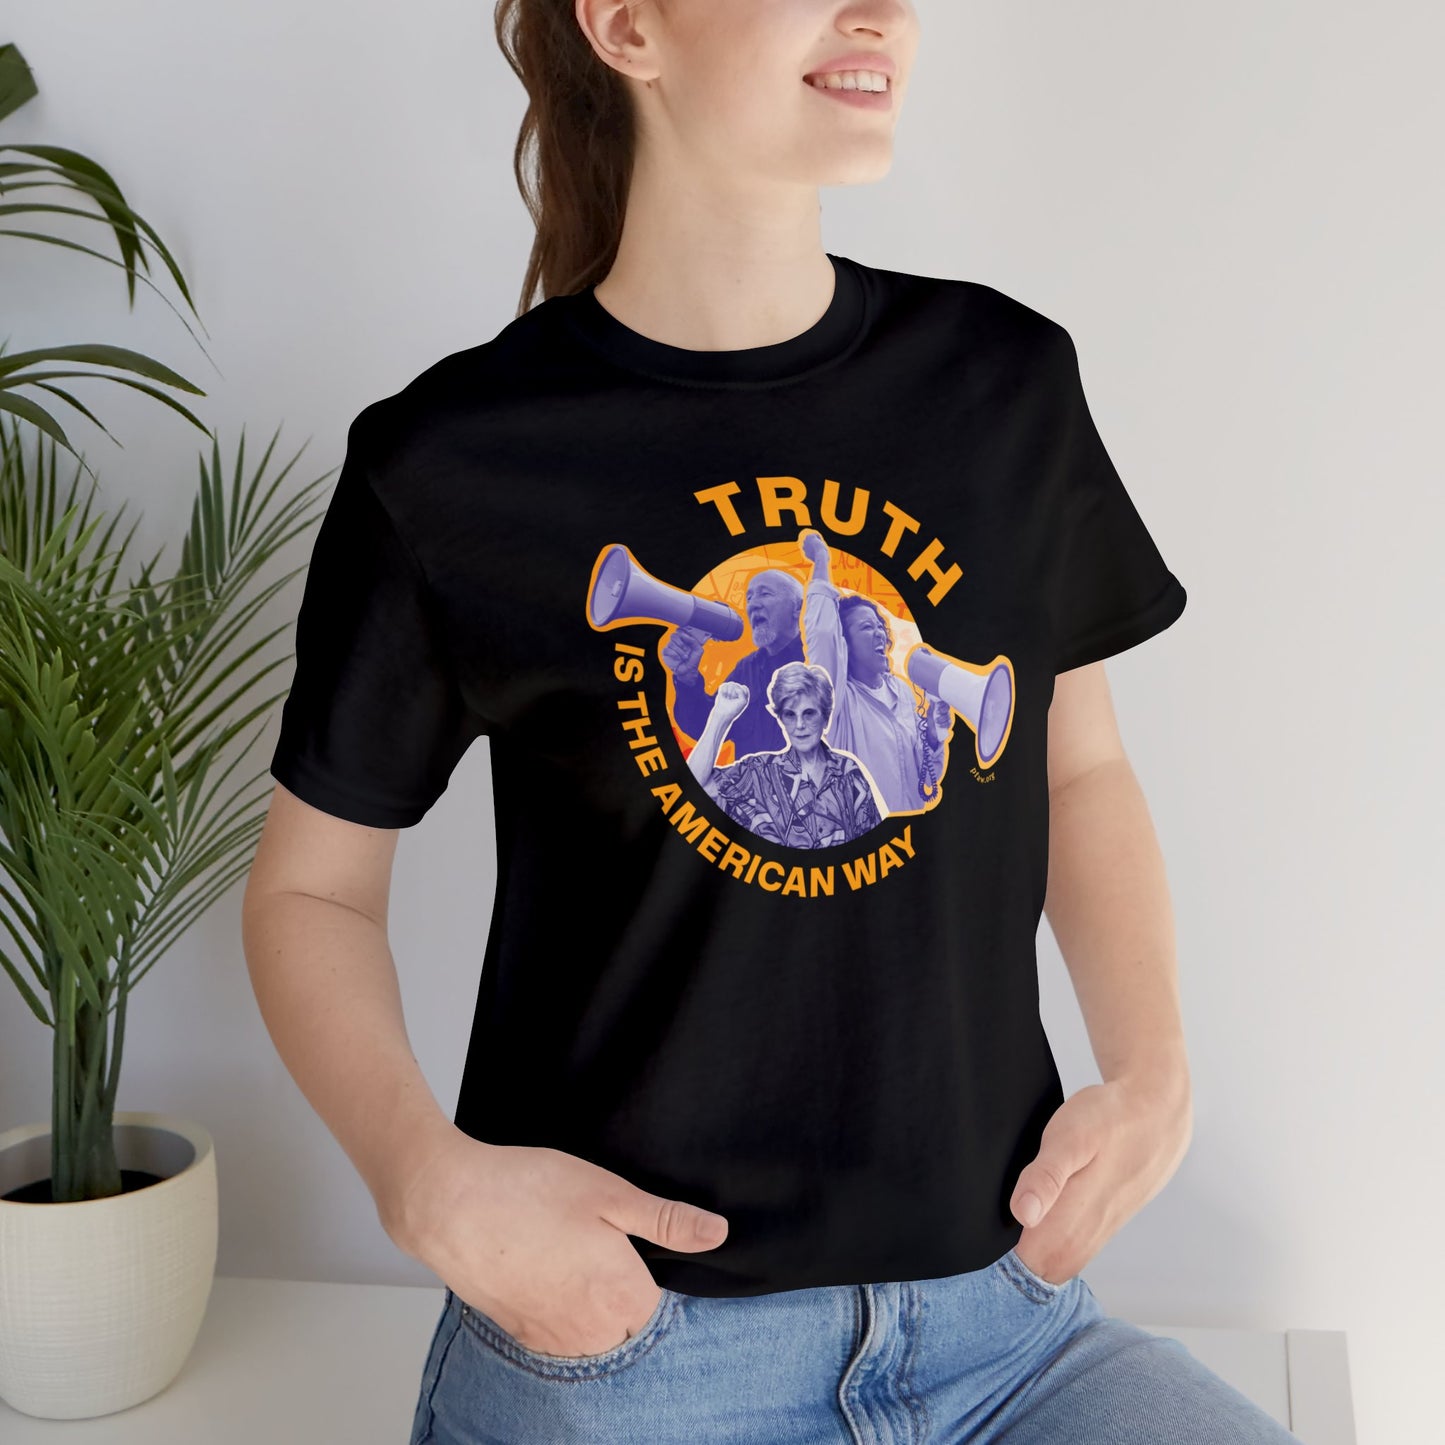 Truth is the American Way Shirt